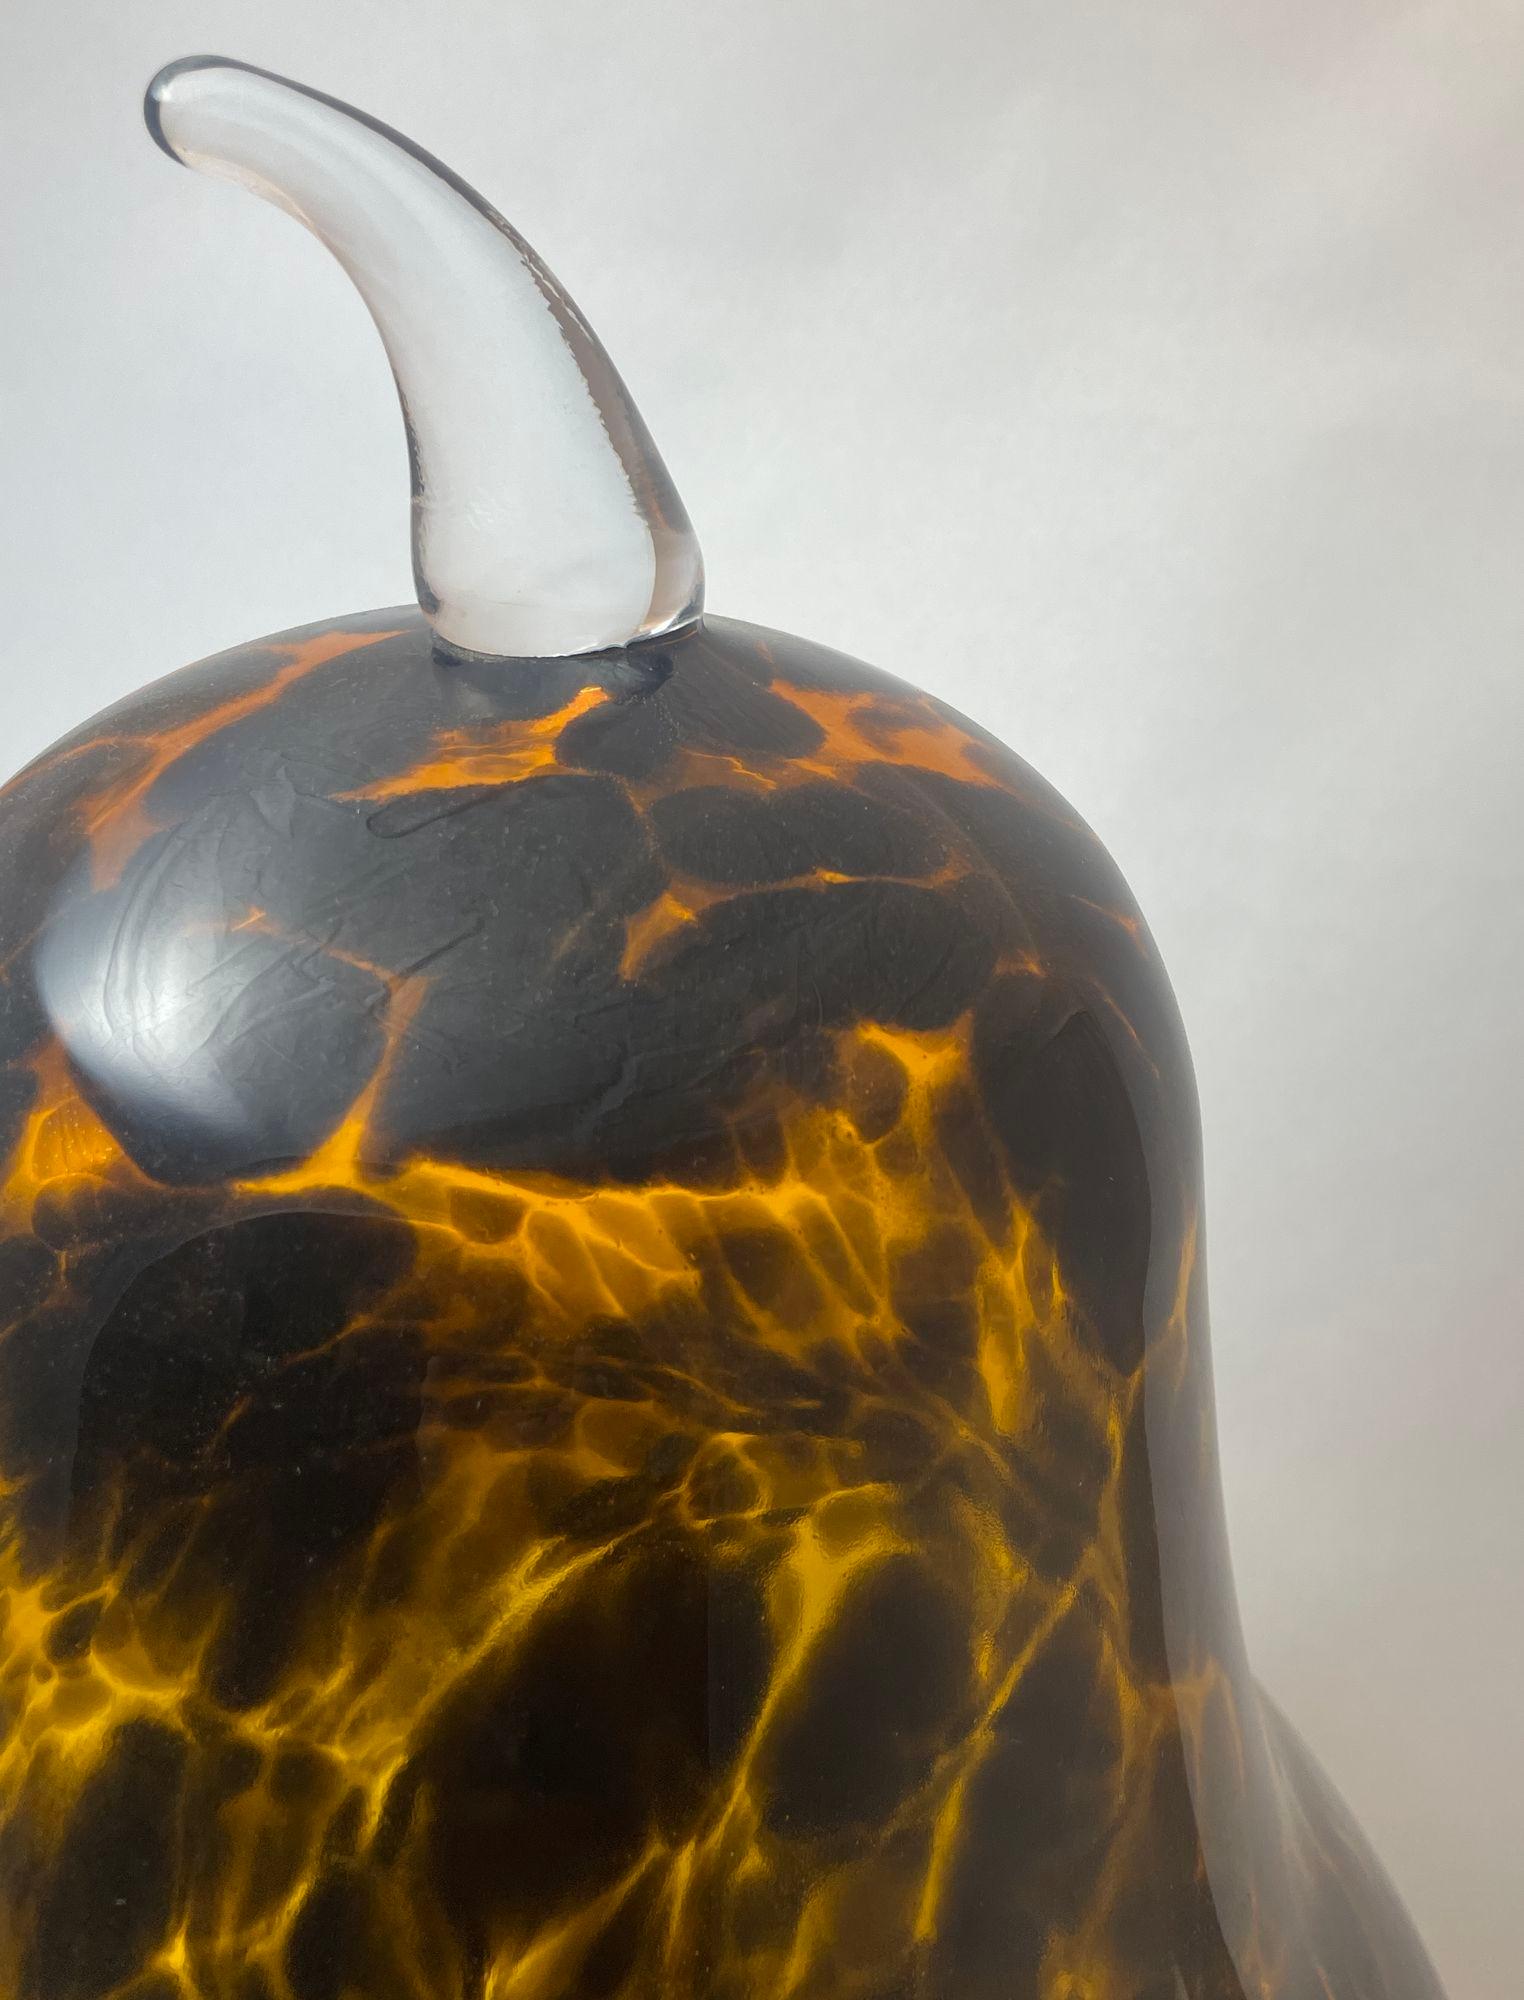 Oversized 1950s Vintage Murano Tortoise Hand Blown Art Glass Giant Pear, 24.5 inches Tall.
This very impressive, hand blown Italian Murano art glass in the shape of a giant pear. 
It is handcrafted in a so called tortoise shell pattern glass, a